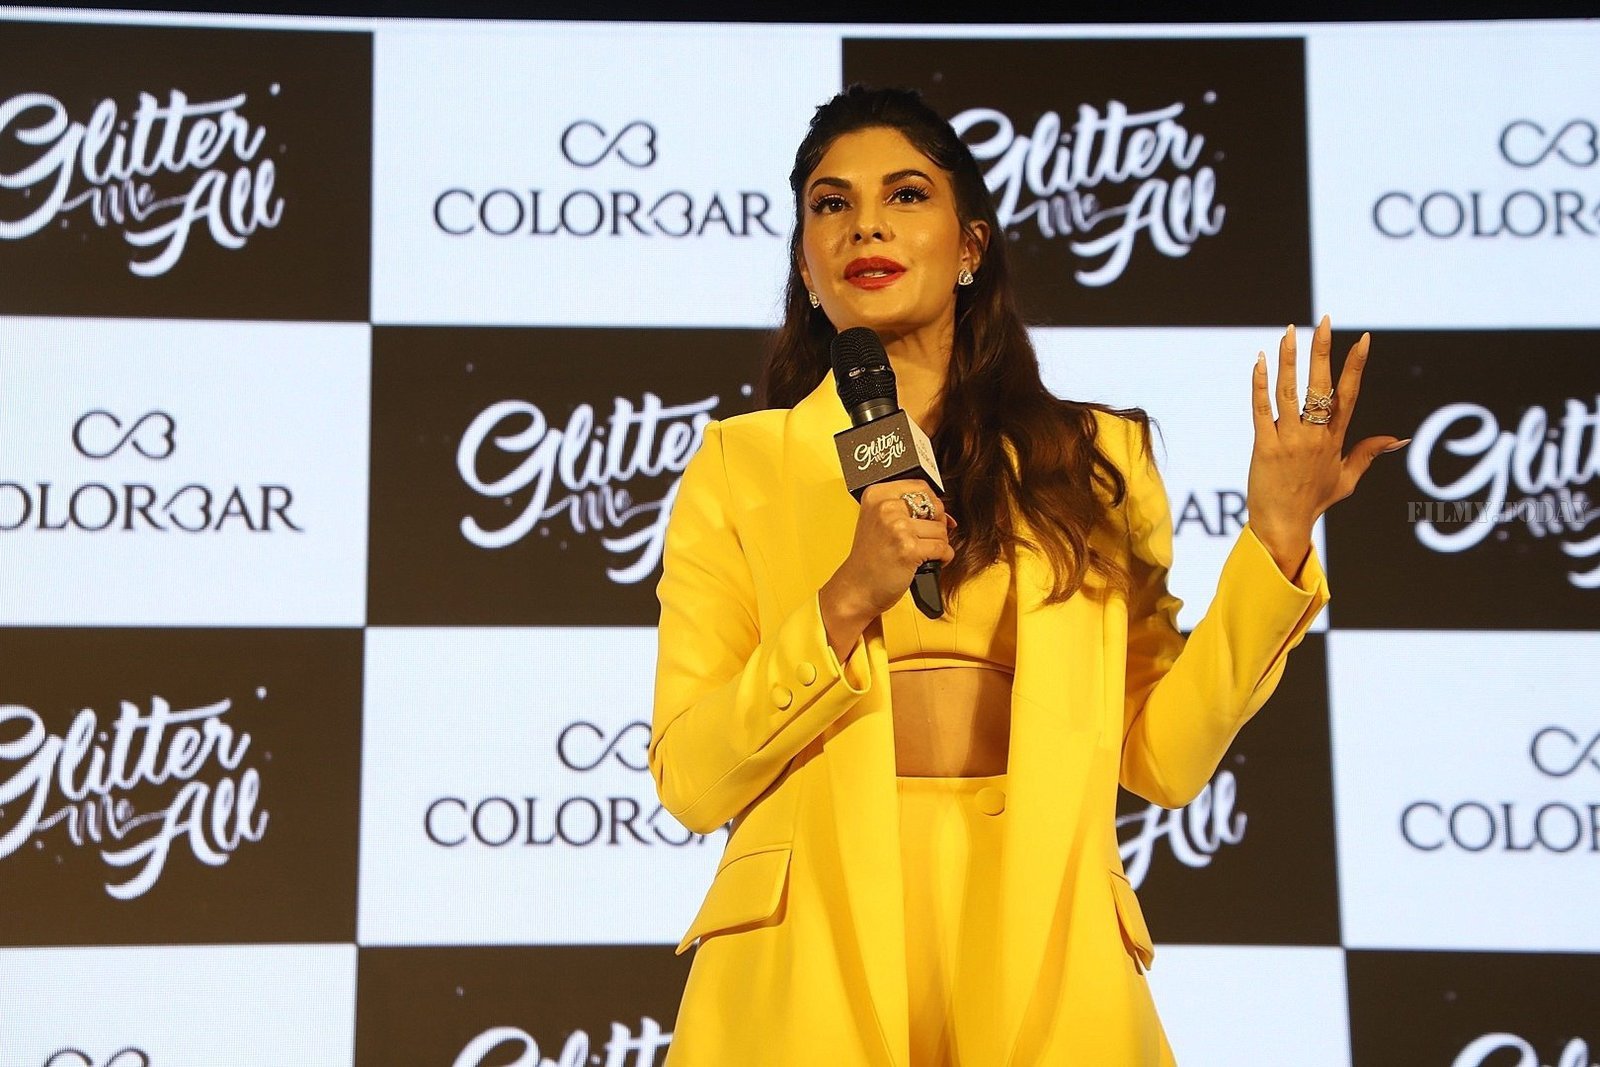 Photos: Jacqueline Fernandez at Launch Of Colorbar Glitter Me All | Picture 1638924